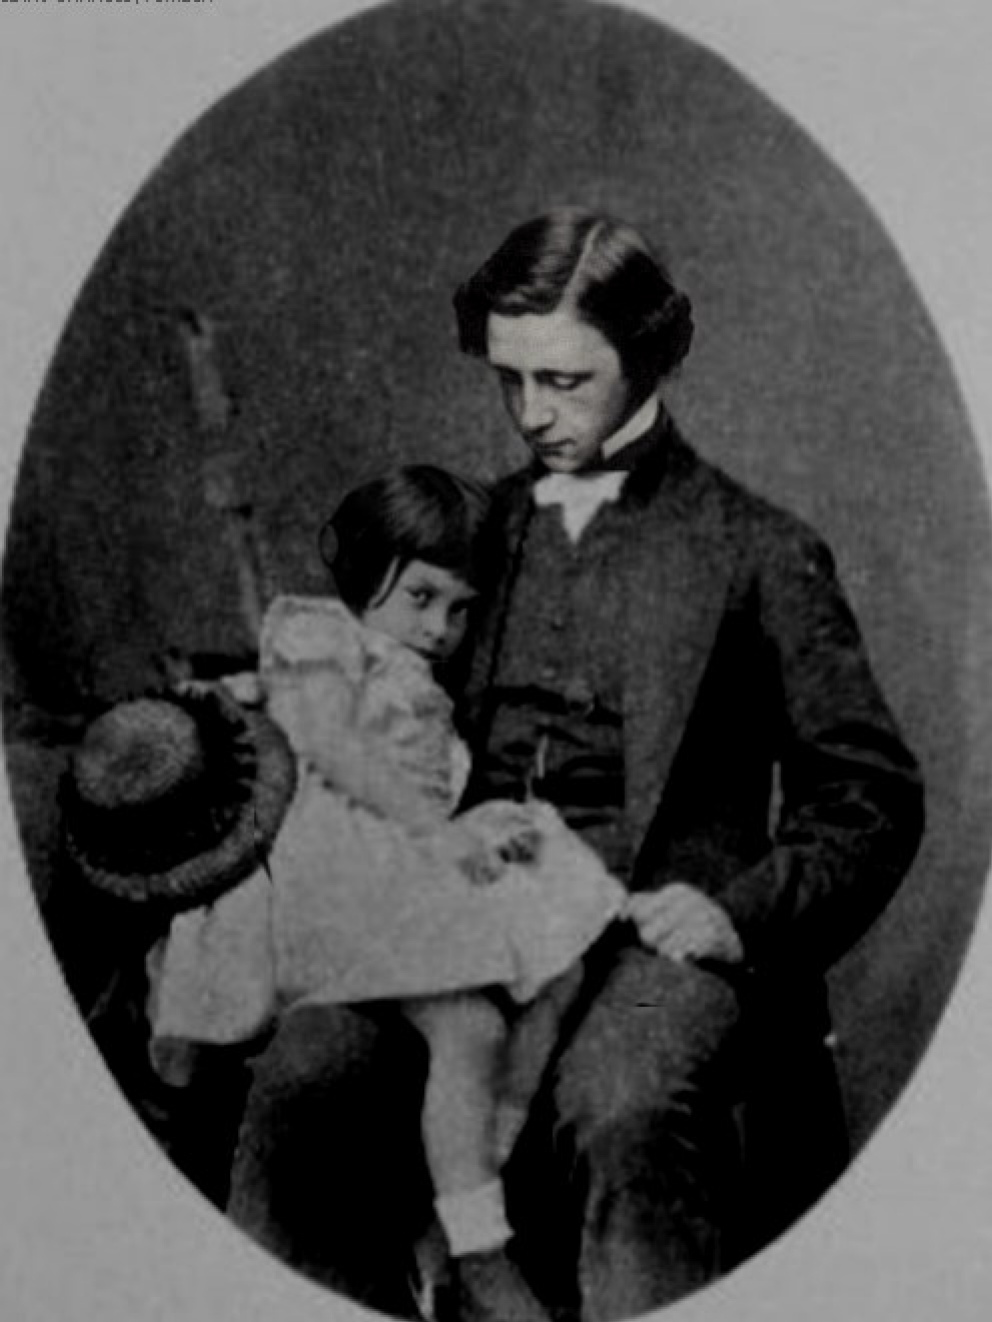 The Photography of Lewis Carroll